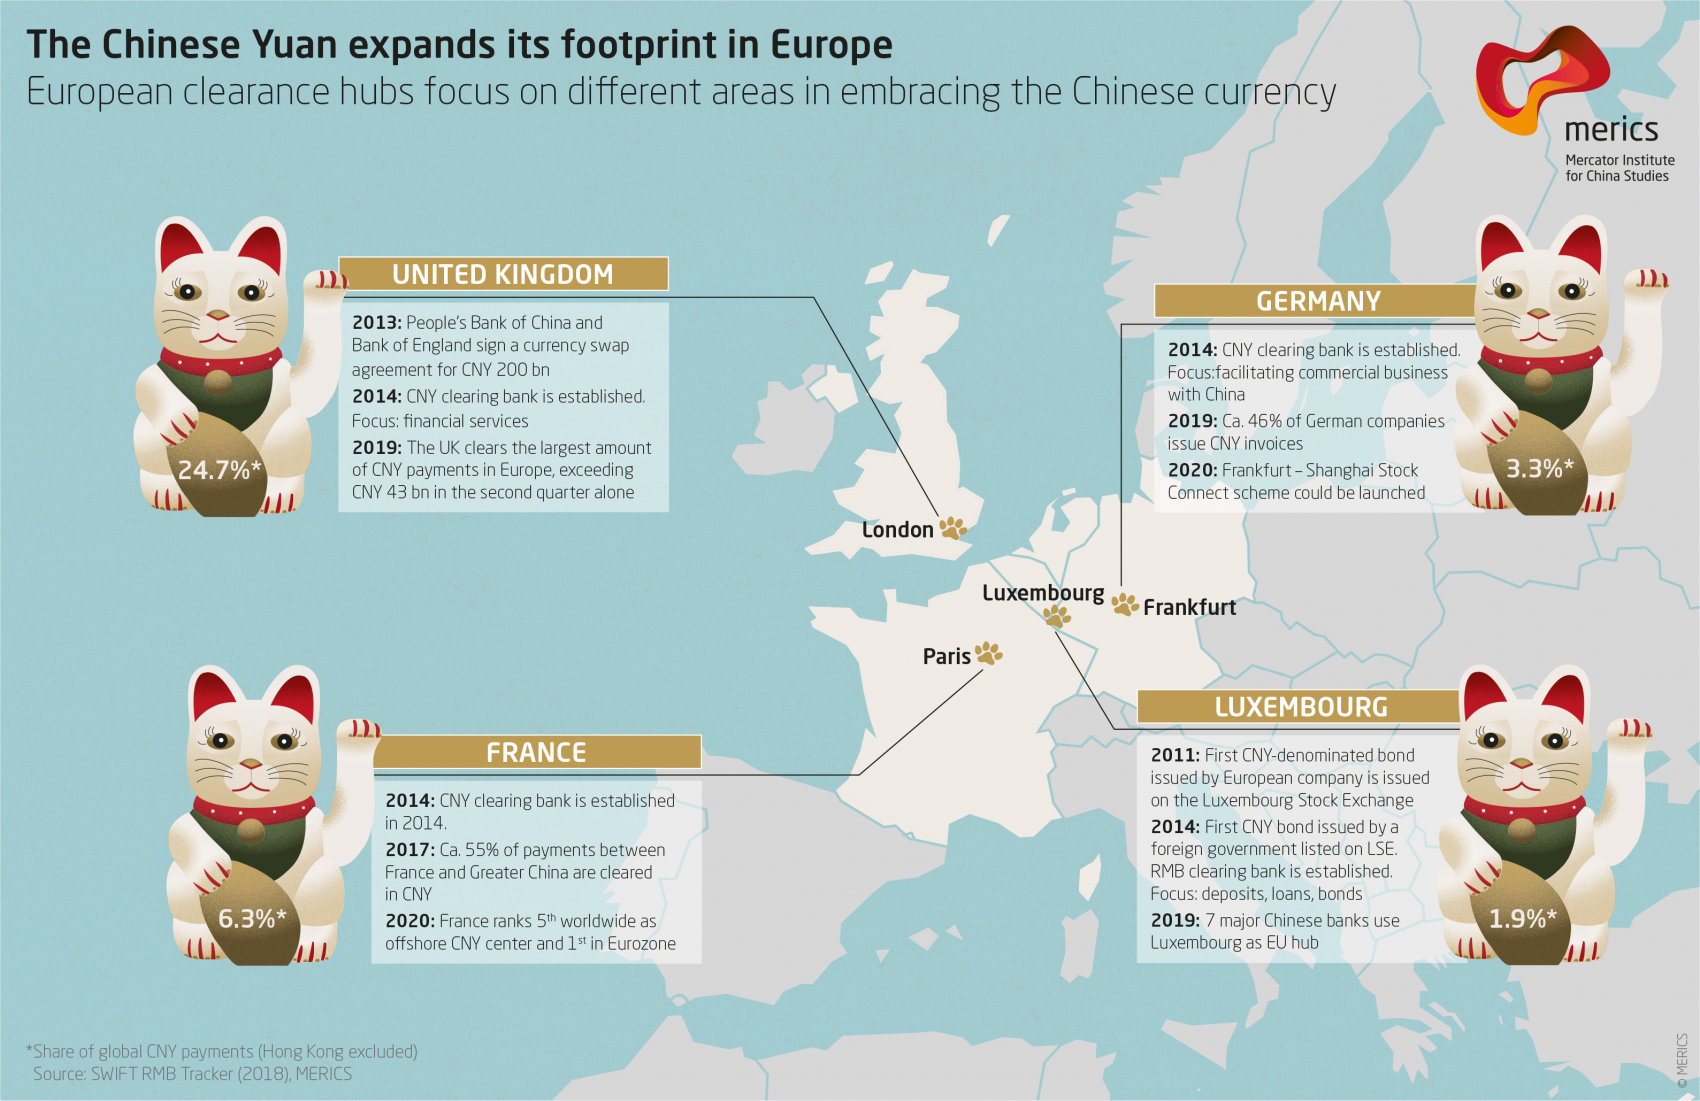 The Chinese Yuan expands its footprint in Europe